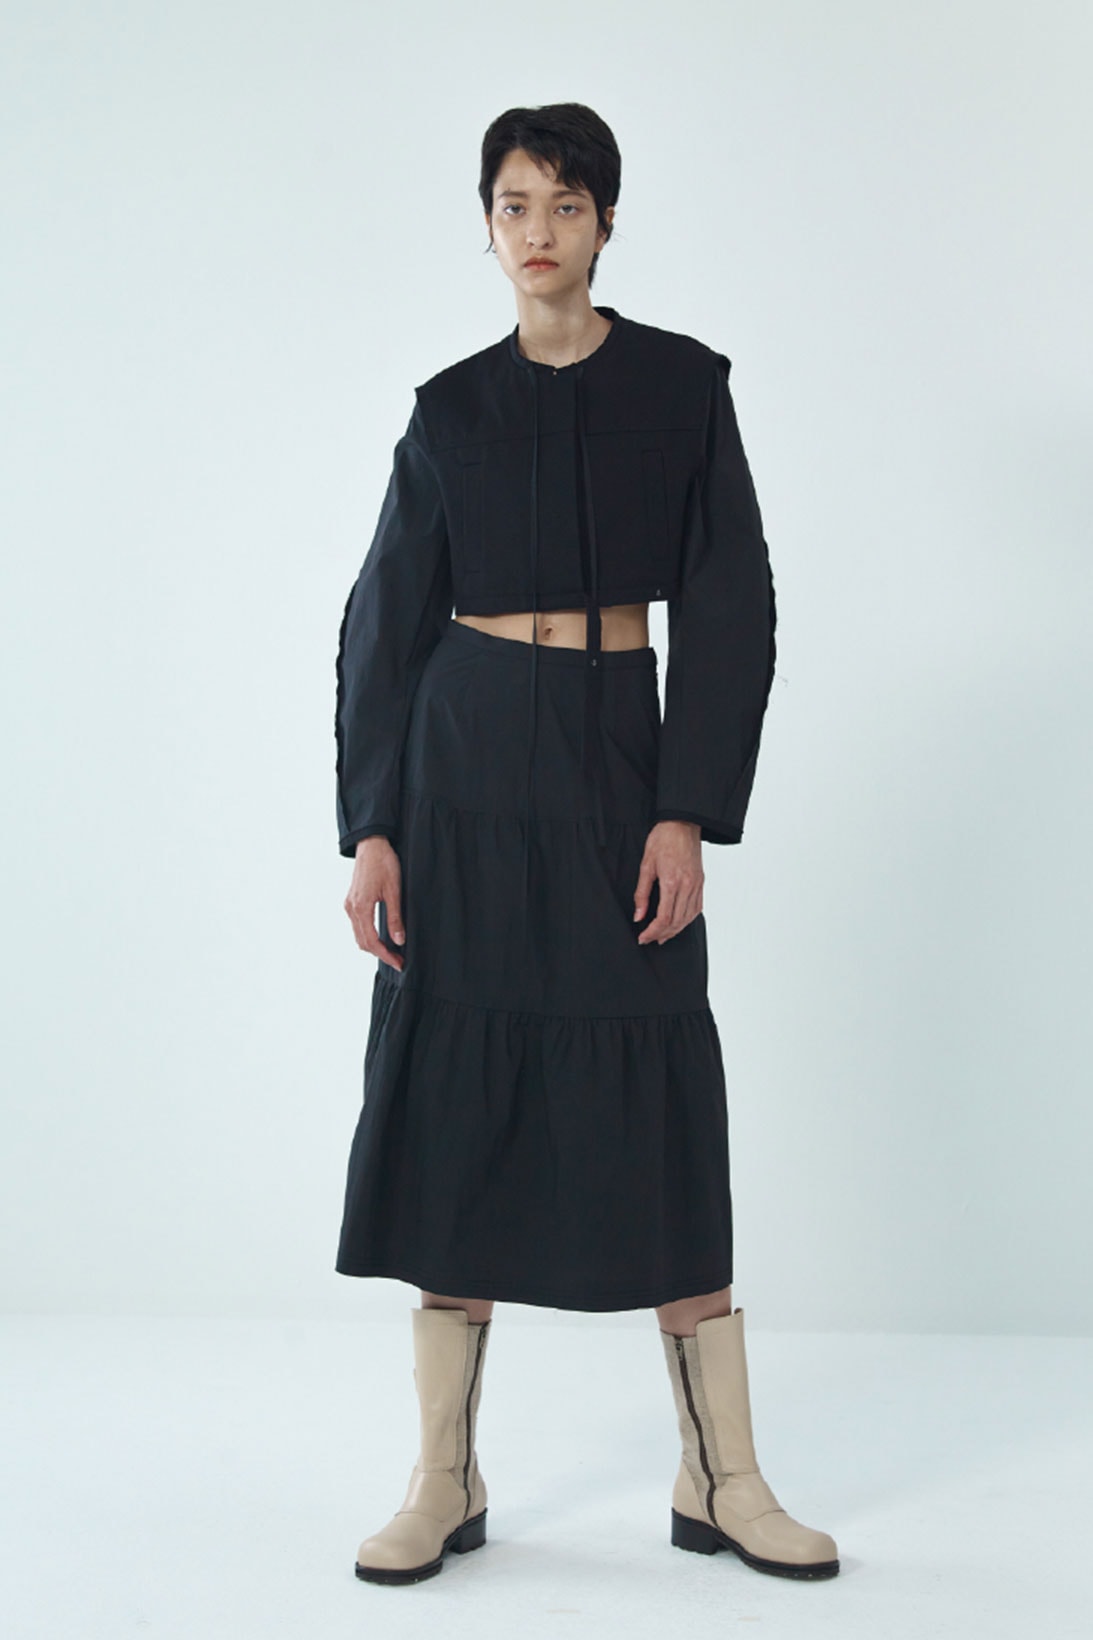 theopen product spring summer 2021 ss21 collection lookbook cropped hoodie skirt